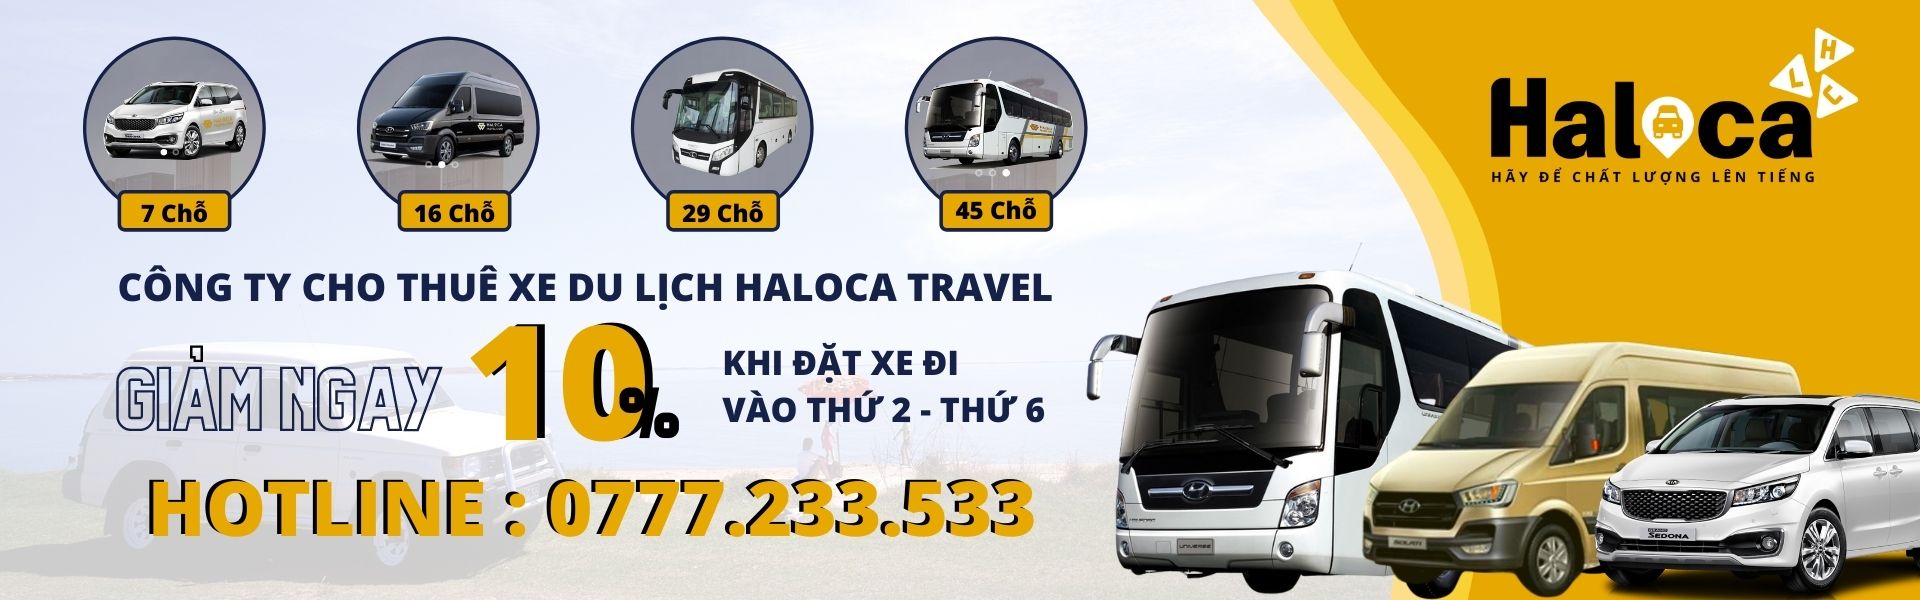 Banner Cho Thue Xe Du Lich Cty Haloc Travel 2021